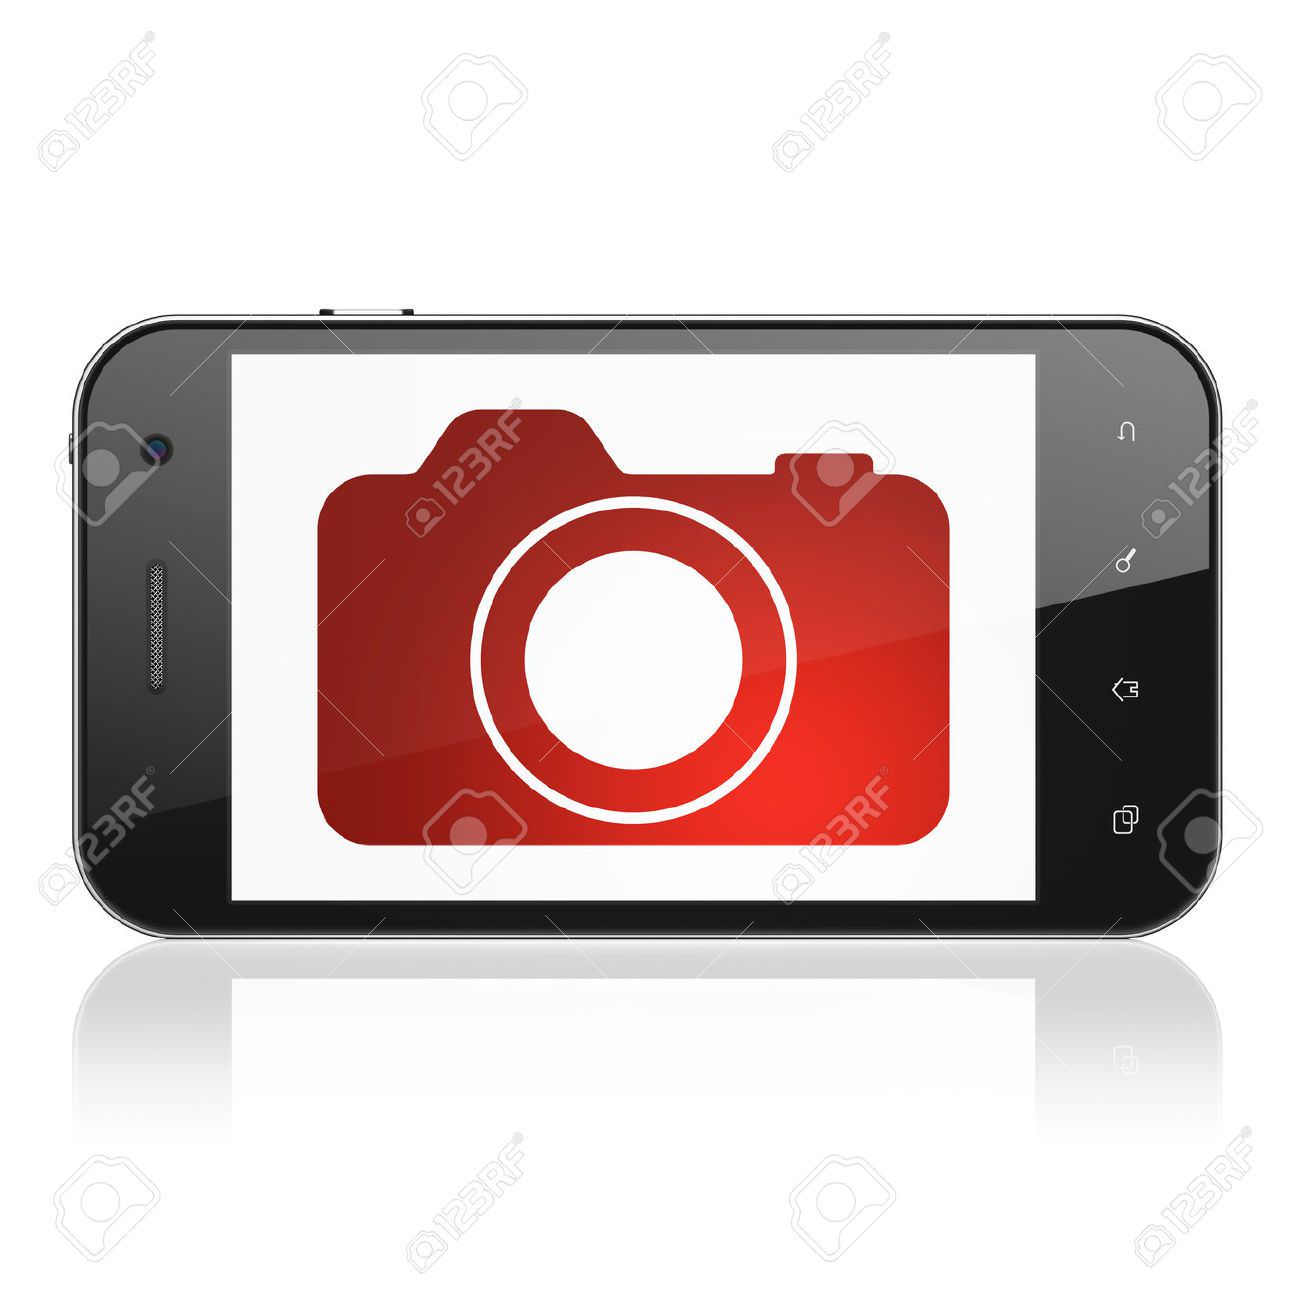 Cell Phone Camera Clipart.